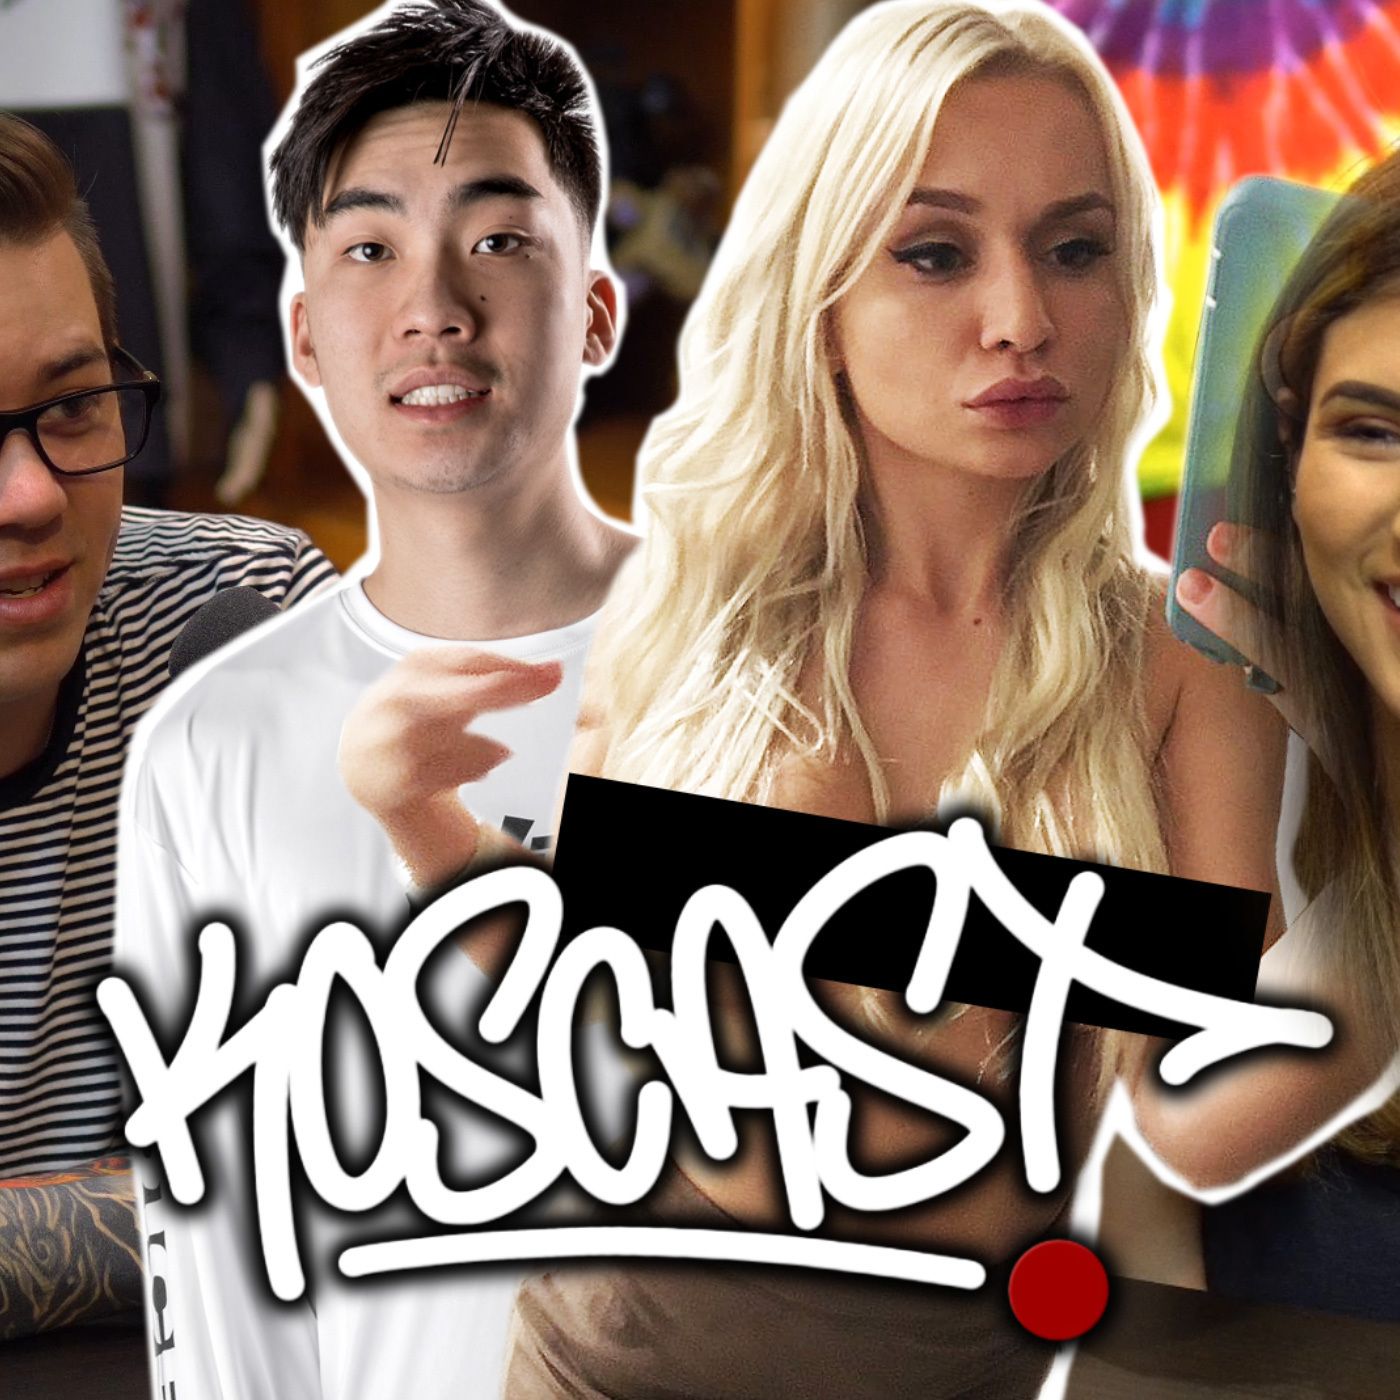 2: #KOSCAST with Linda: The LUXE House, Zoie Burgher & Ricegum